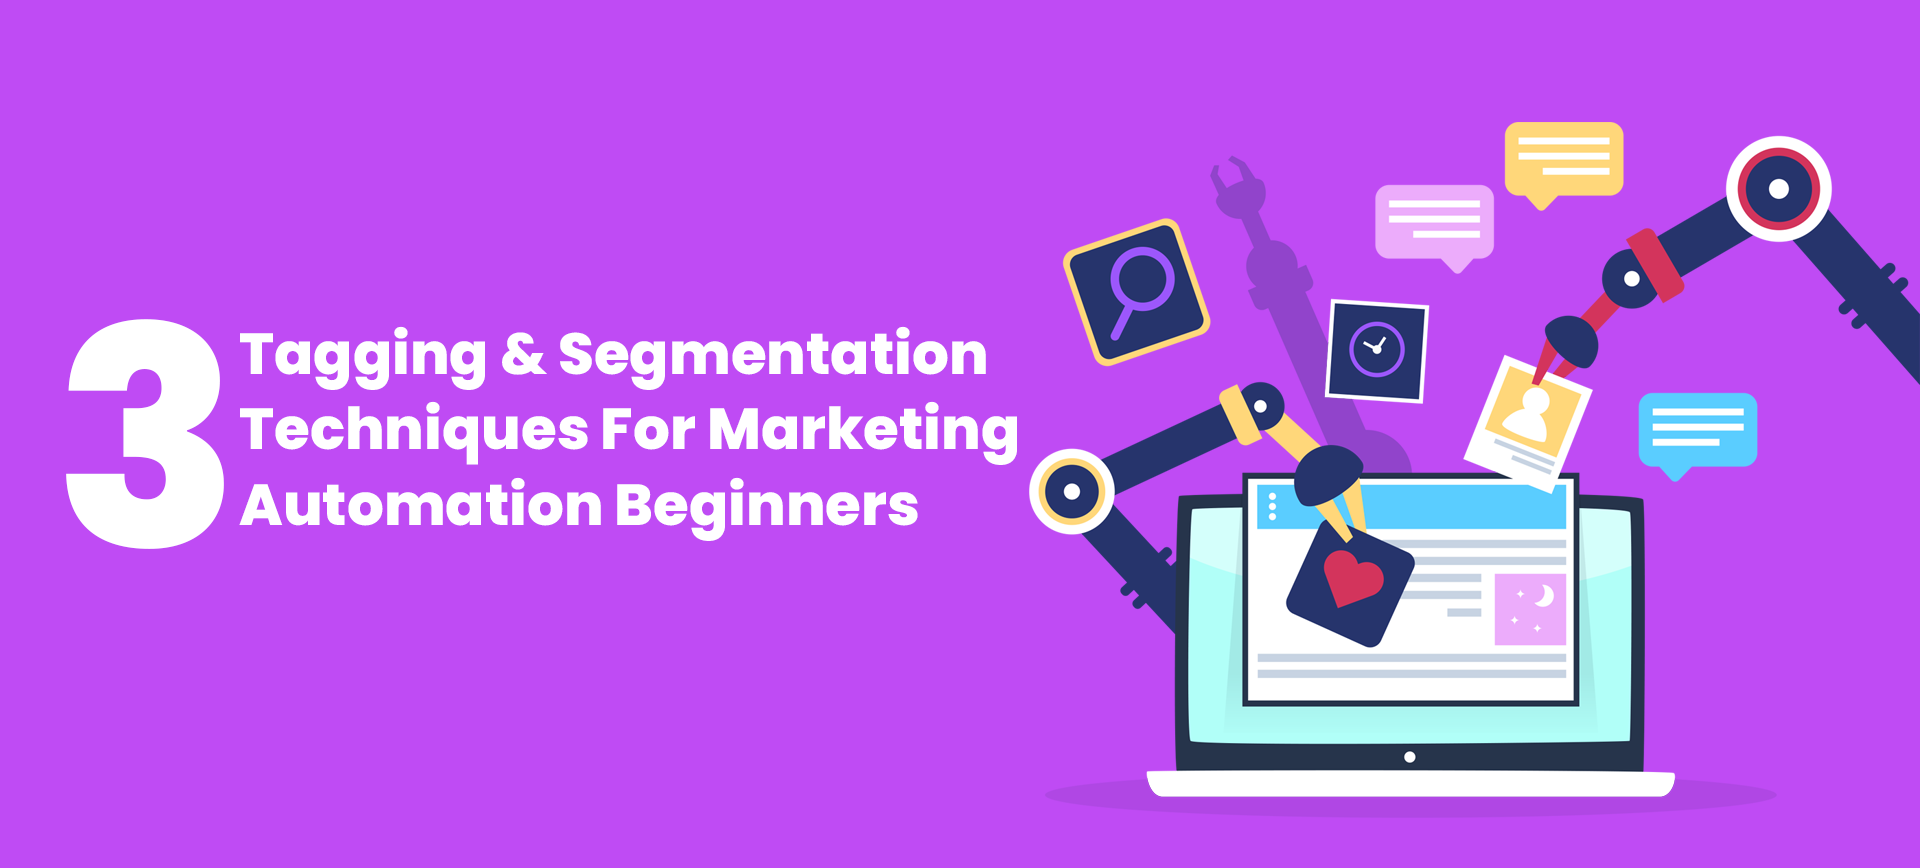 3 Tagging & Segmentation Techniques For Marketing Automation Beginners